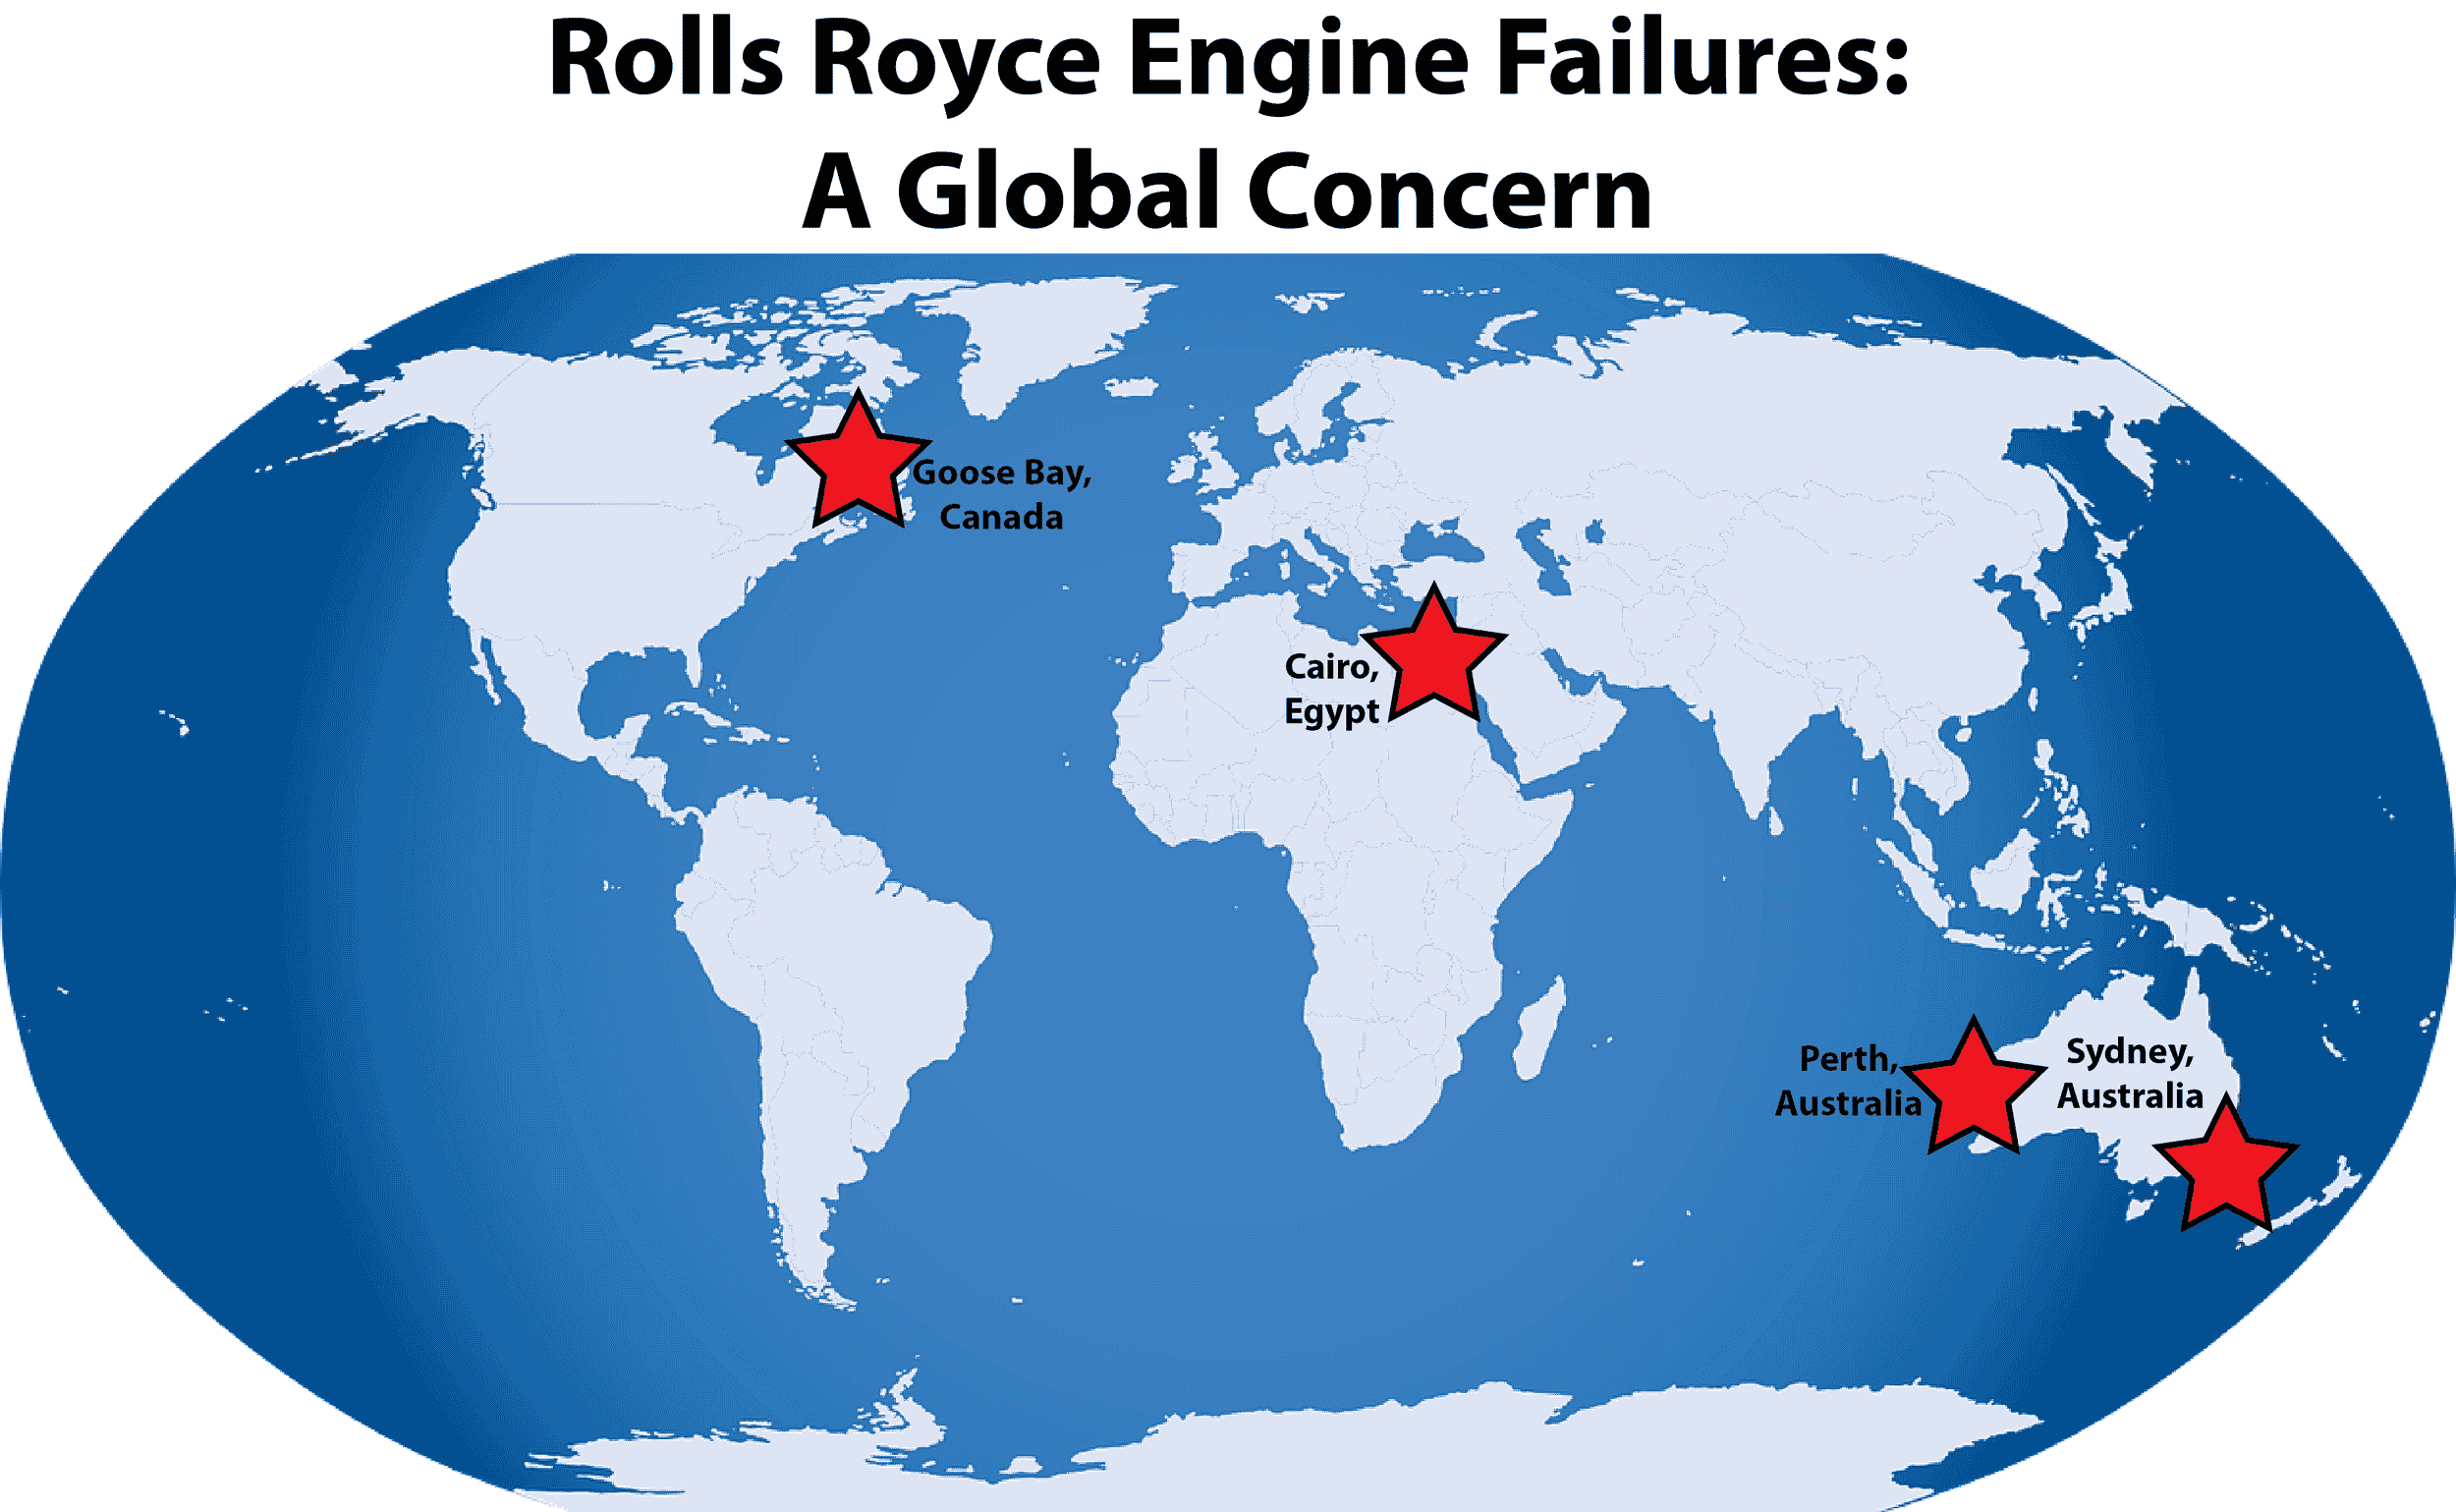 Airlines affected by Rolls Royce engine failures in 2017 include AirAsia X, China Eastern Airlines, Egypt Air and Air France. Infographic courtesy of Carson Myers.